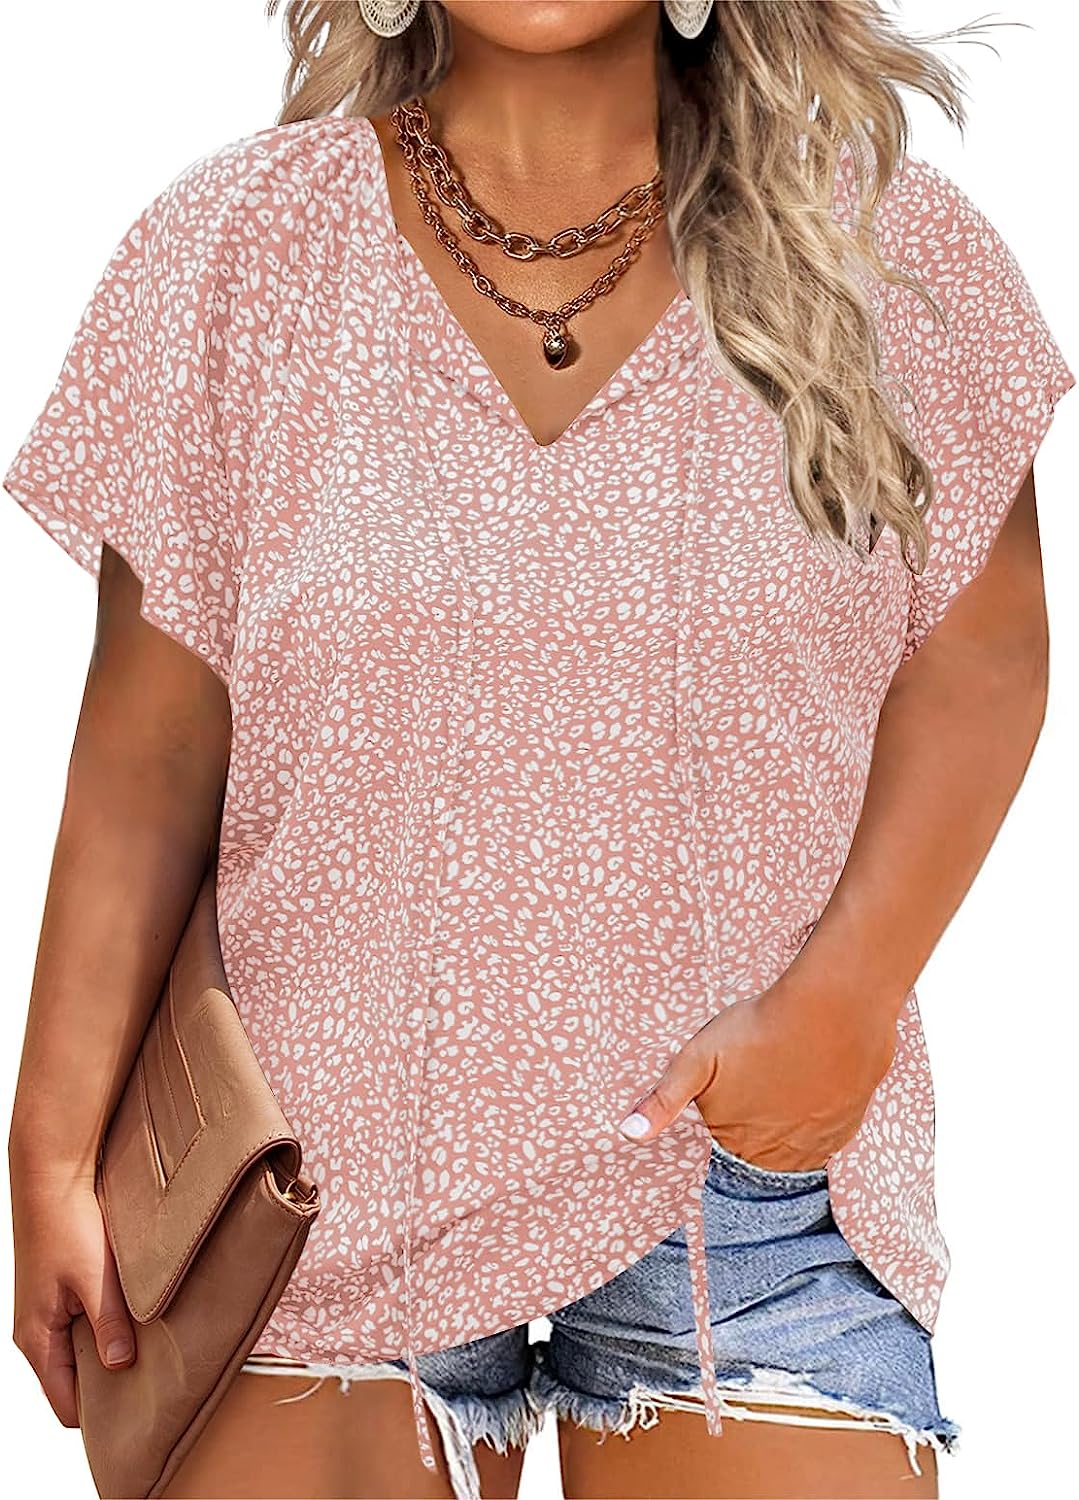 Stay Stylish and Comfortable with IN’VOLAND Womens Plus Size Boho Floral Print Tops